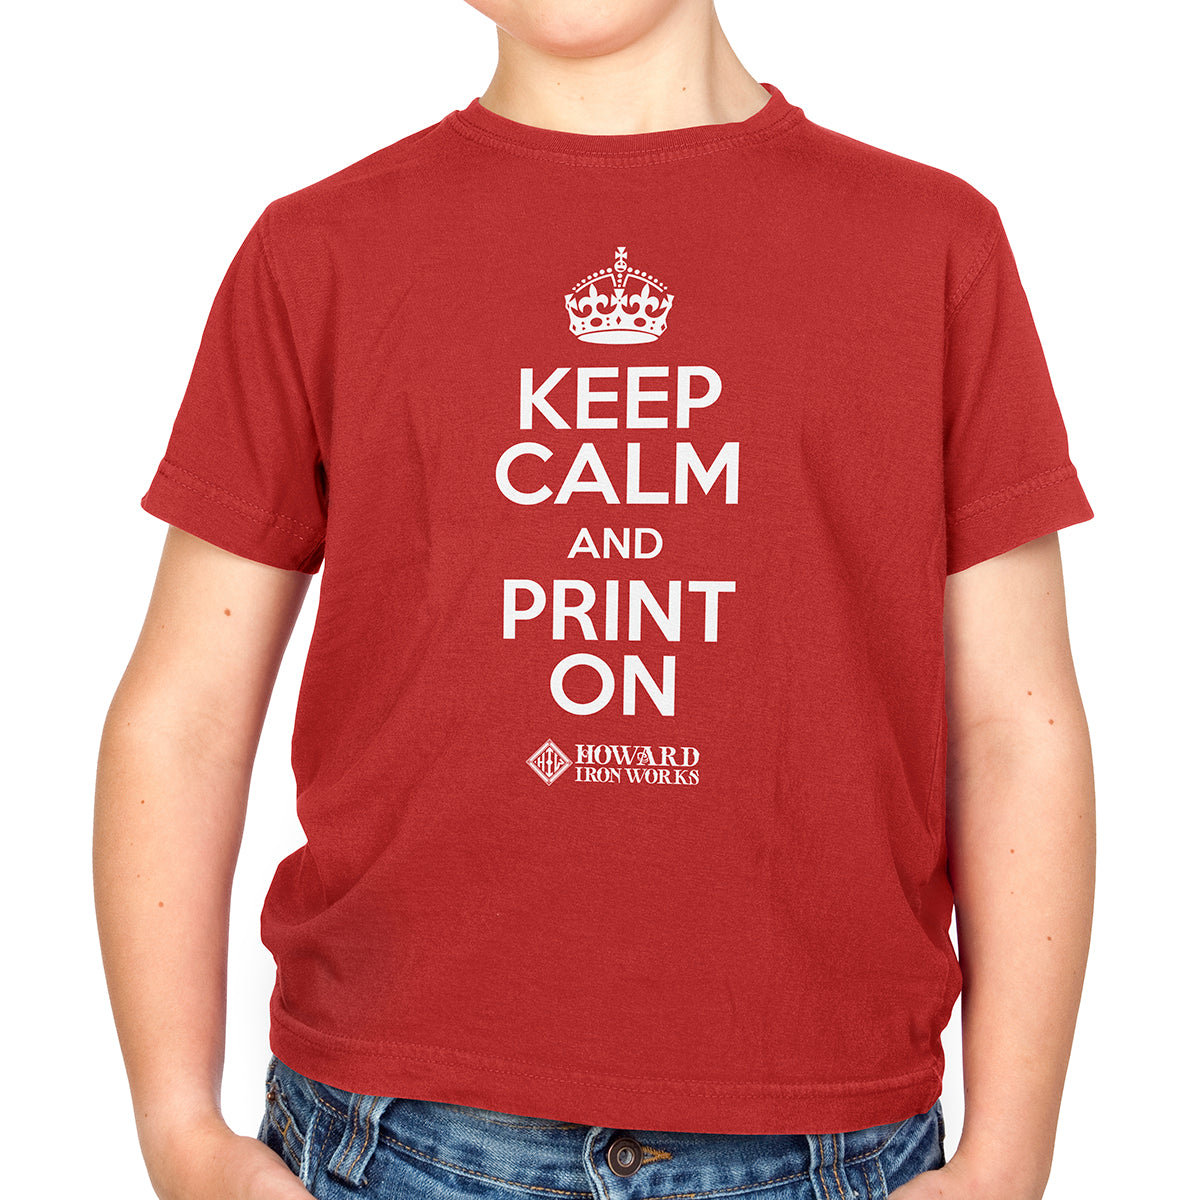 Youth T-shirt, Keep Calm, Red - from Howard Iron Works Printing Museum